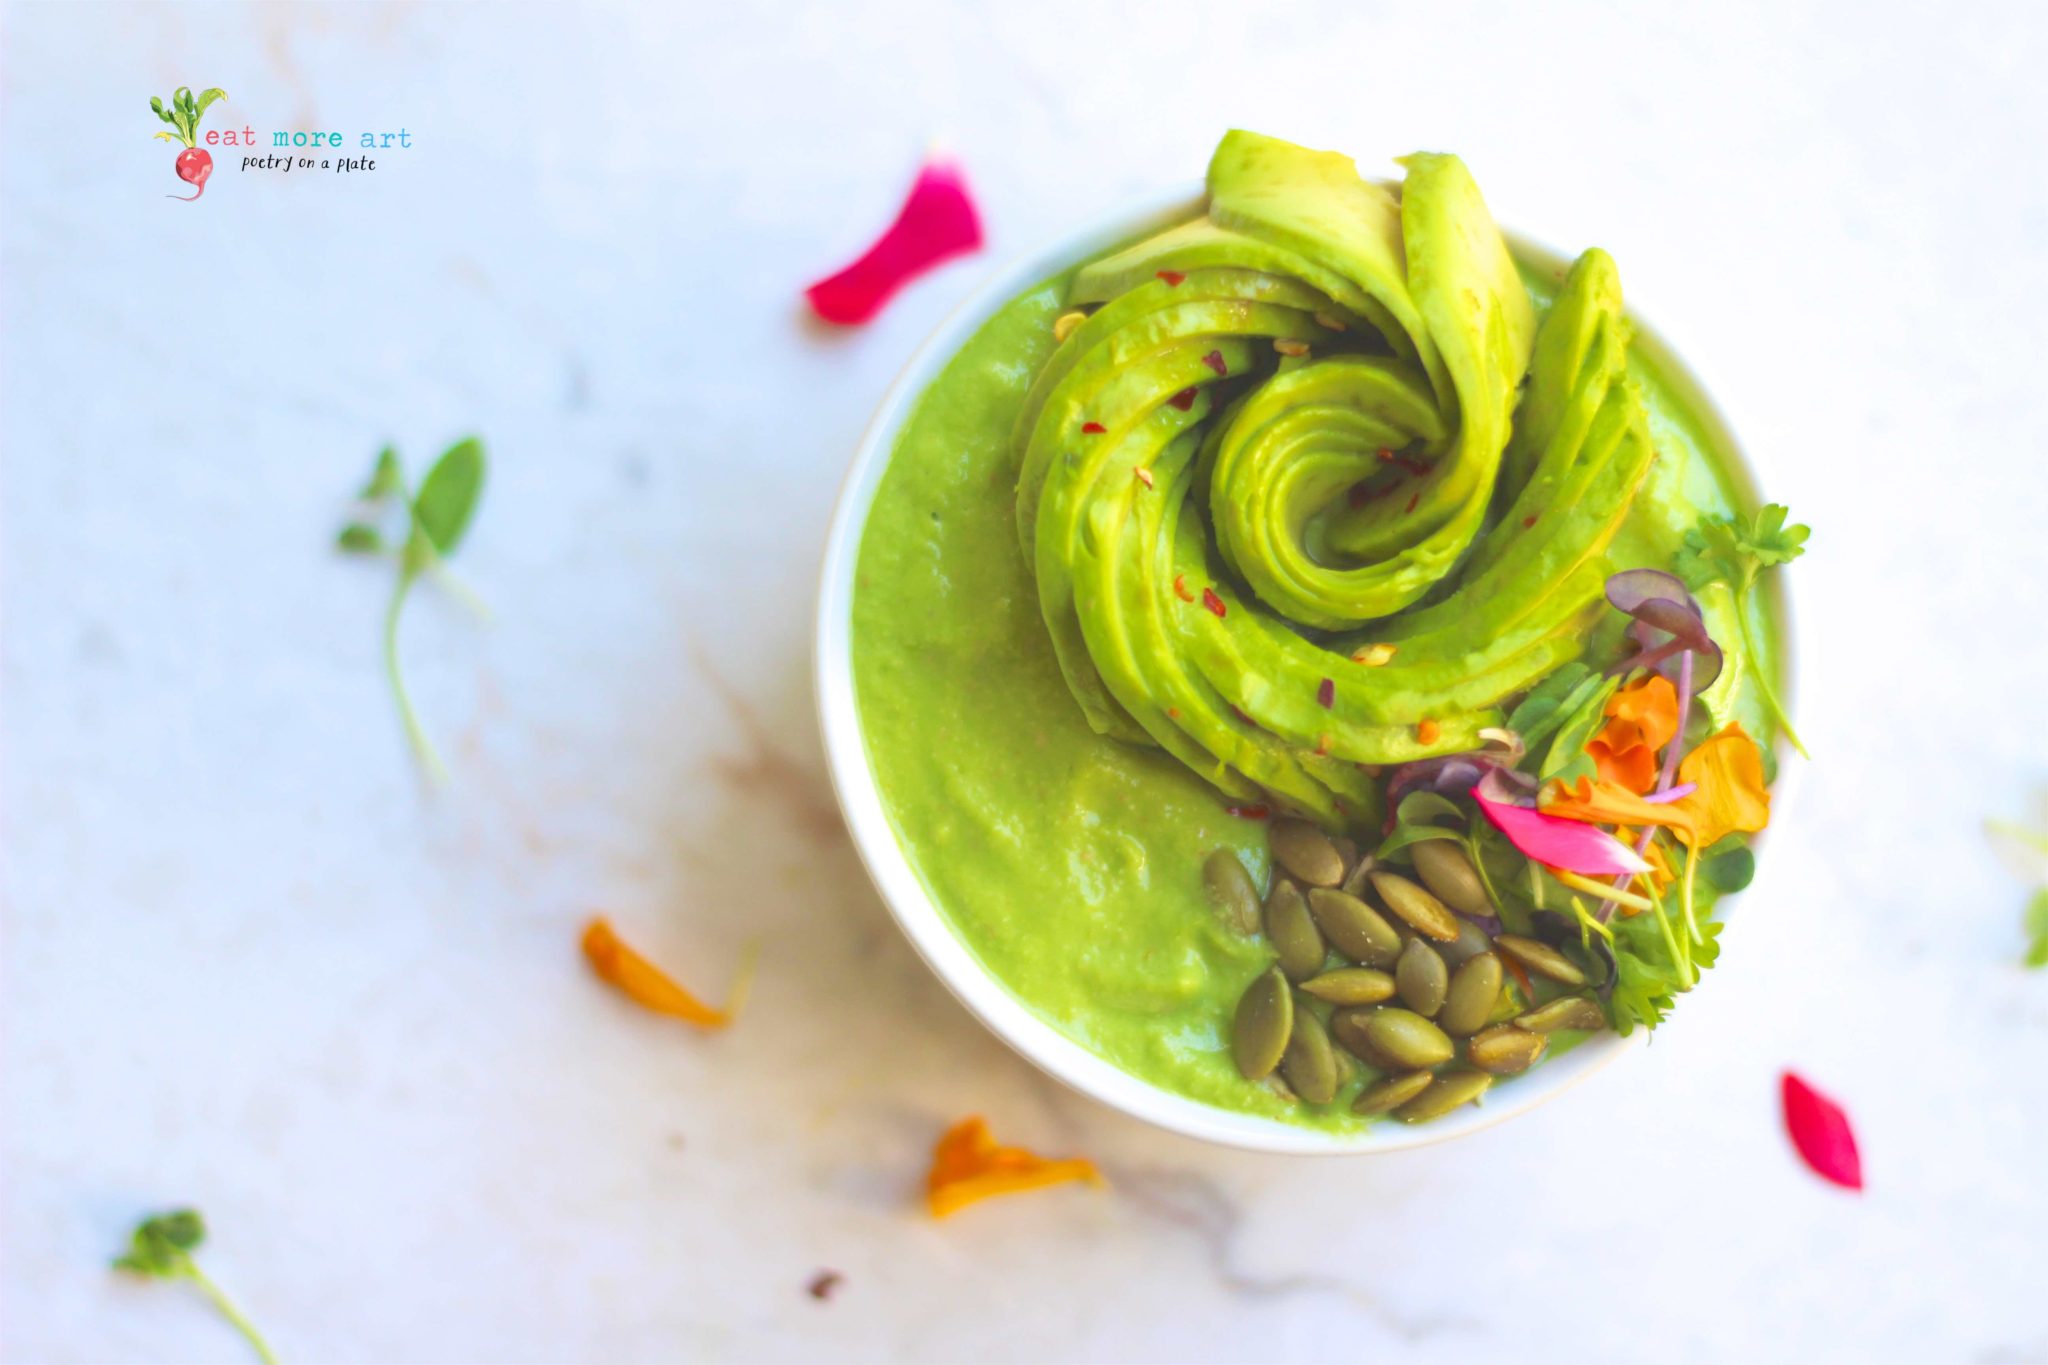 green smoothie bowl topped with avocado rose and edible flowers